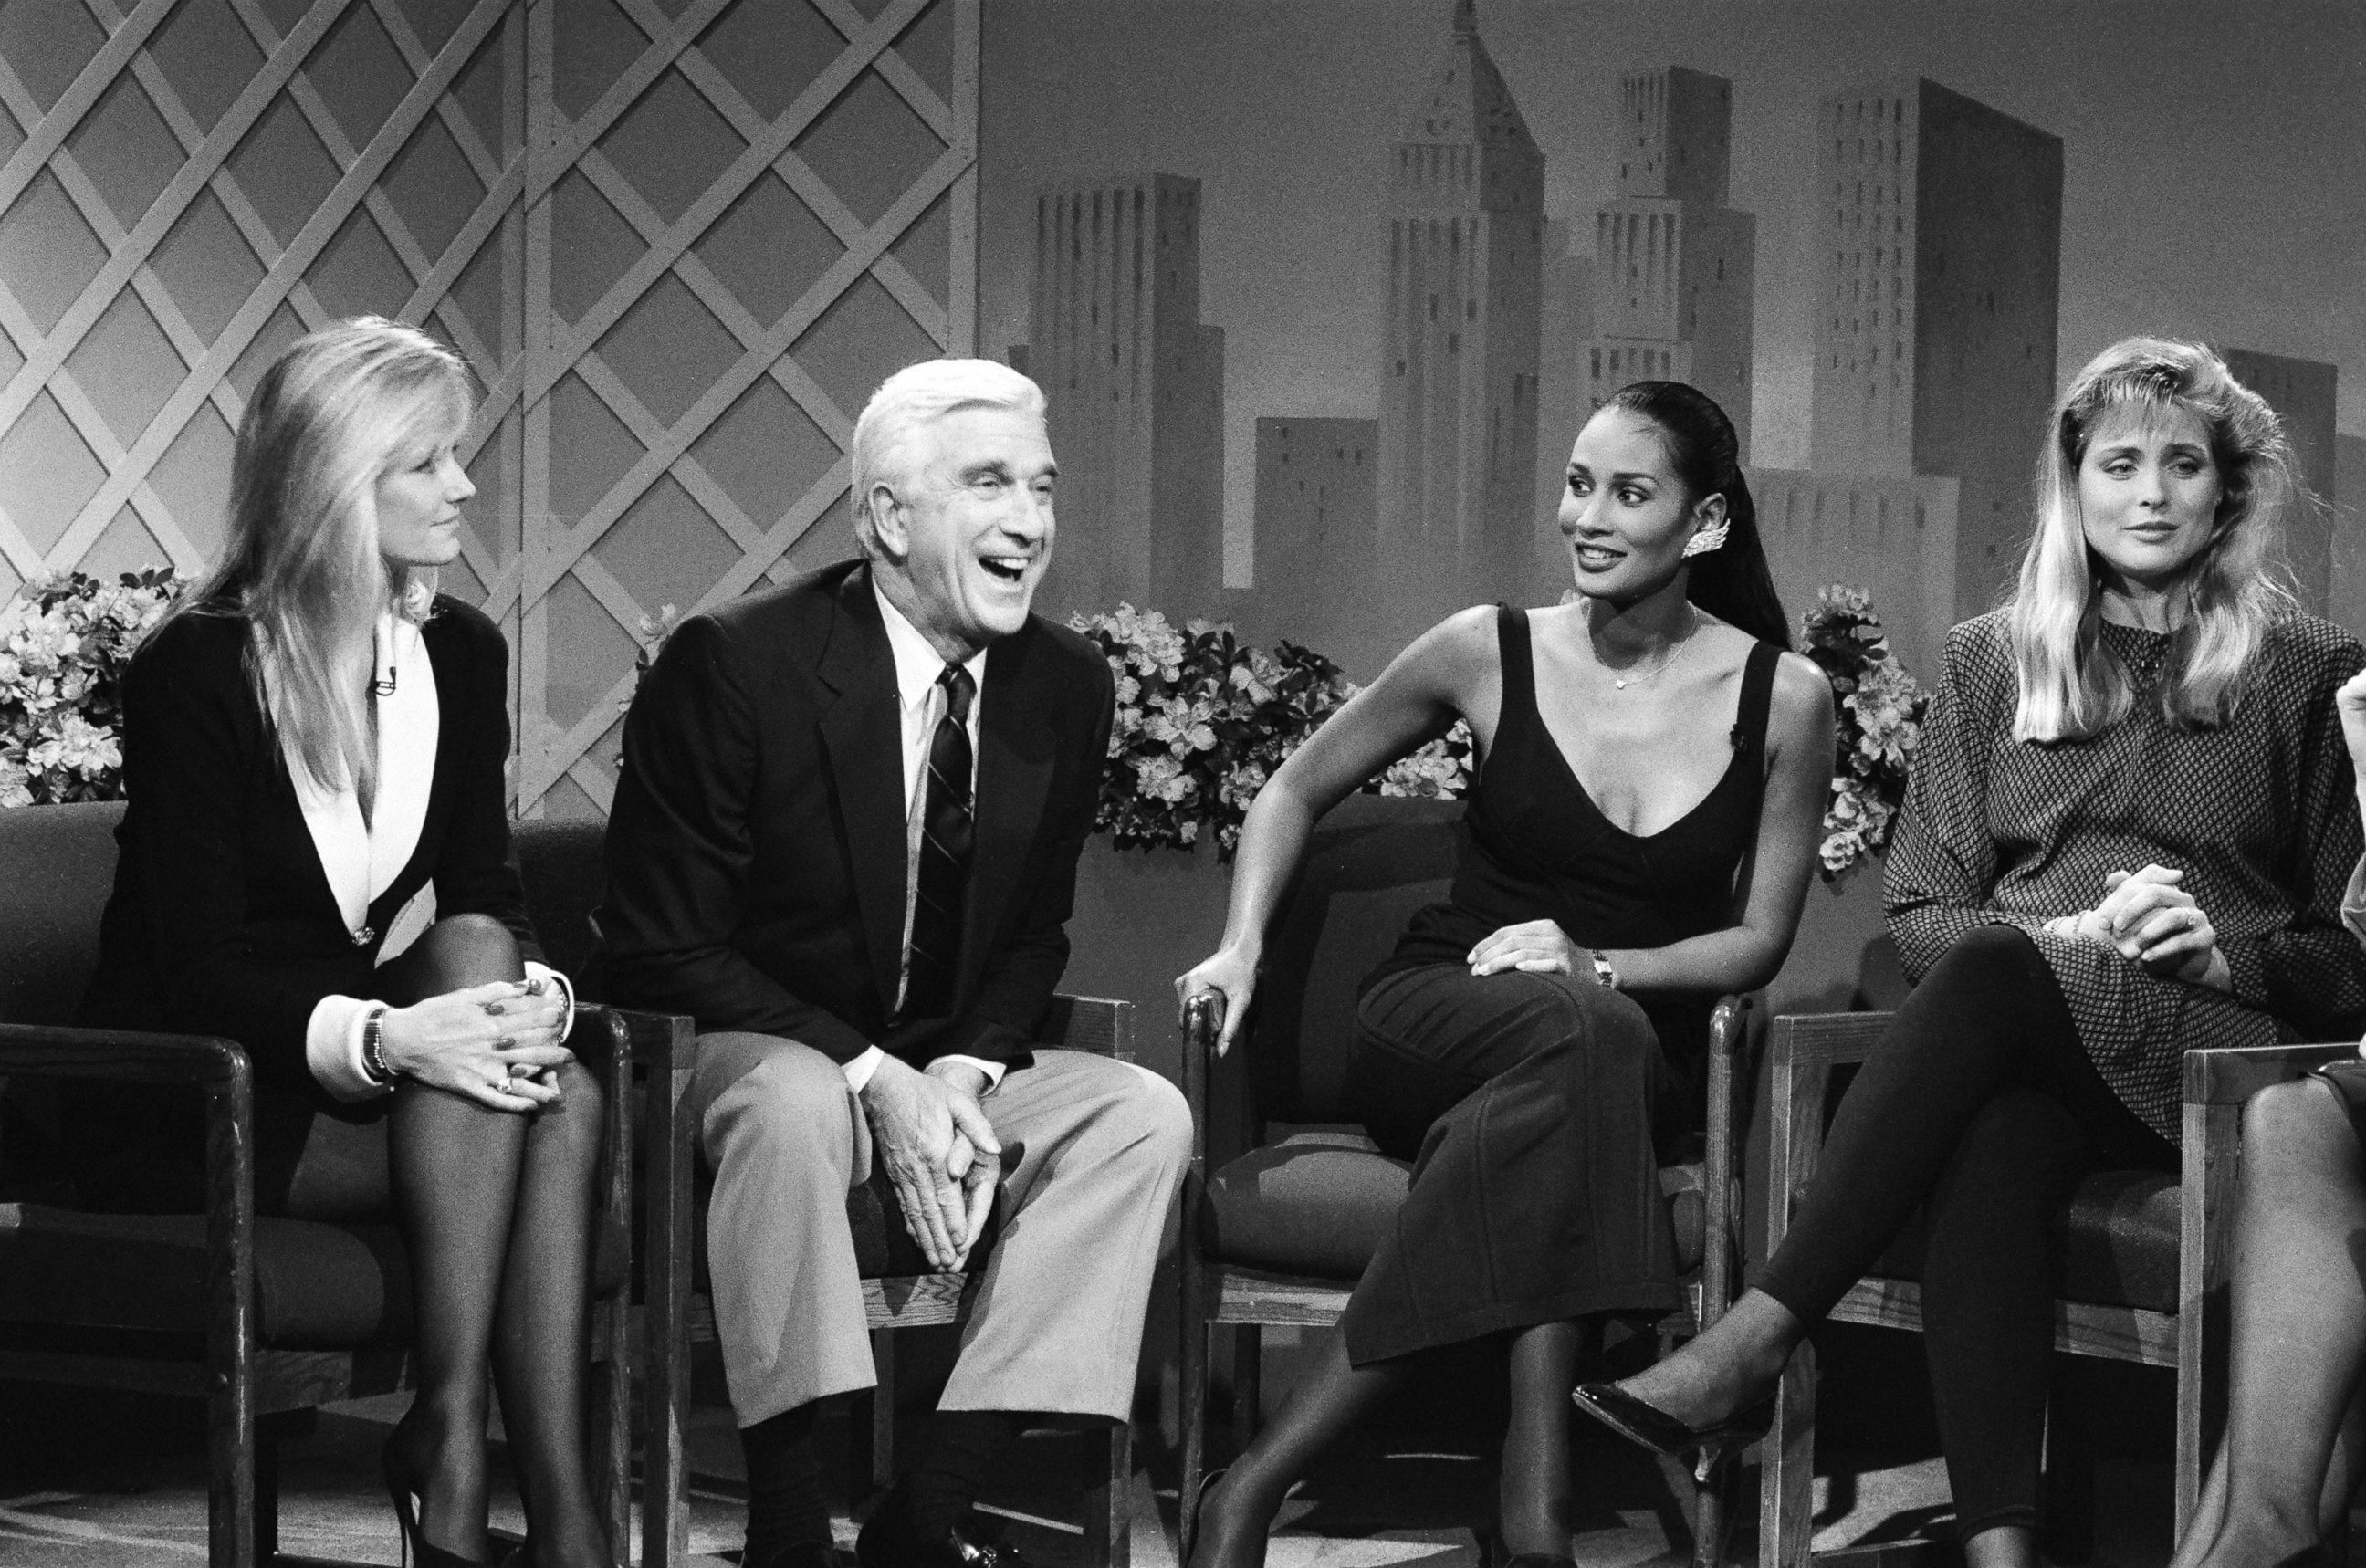 PHOTO: From left, Kim Alexis, Leslie Nielsen, Beverly Johnson, and Cheryl Tiegs are pictured during a taping of "Saturday Night Live" on Feb. 18, 1989.